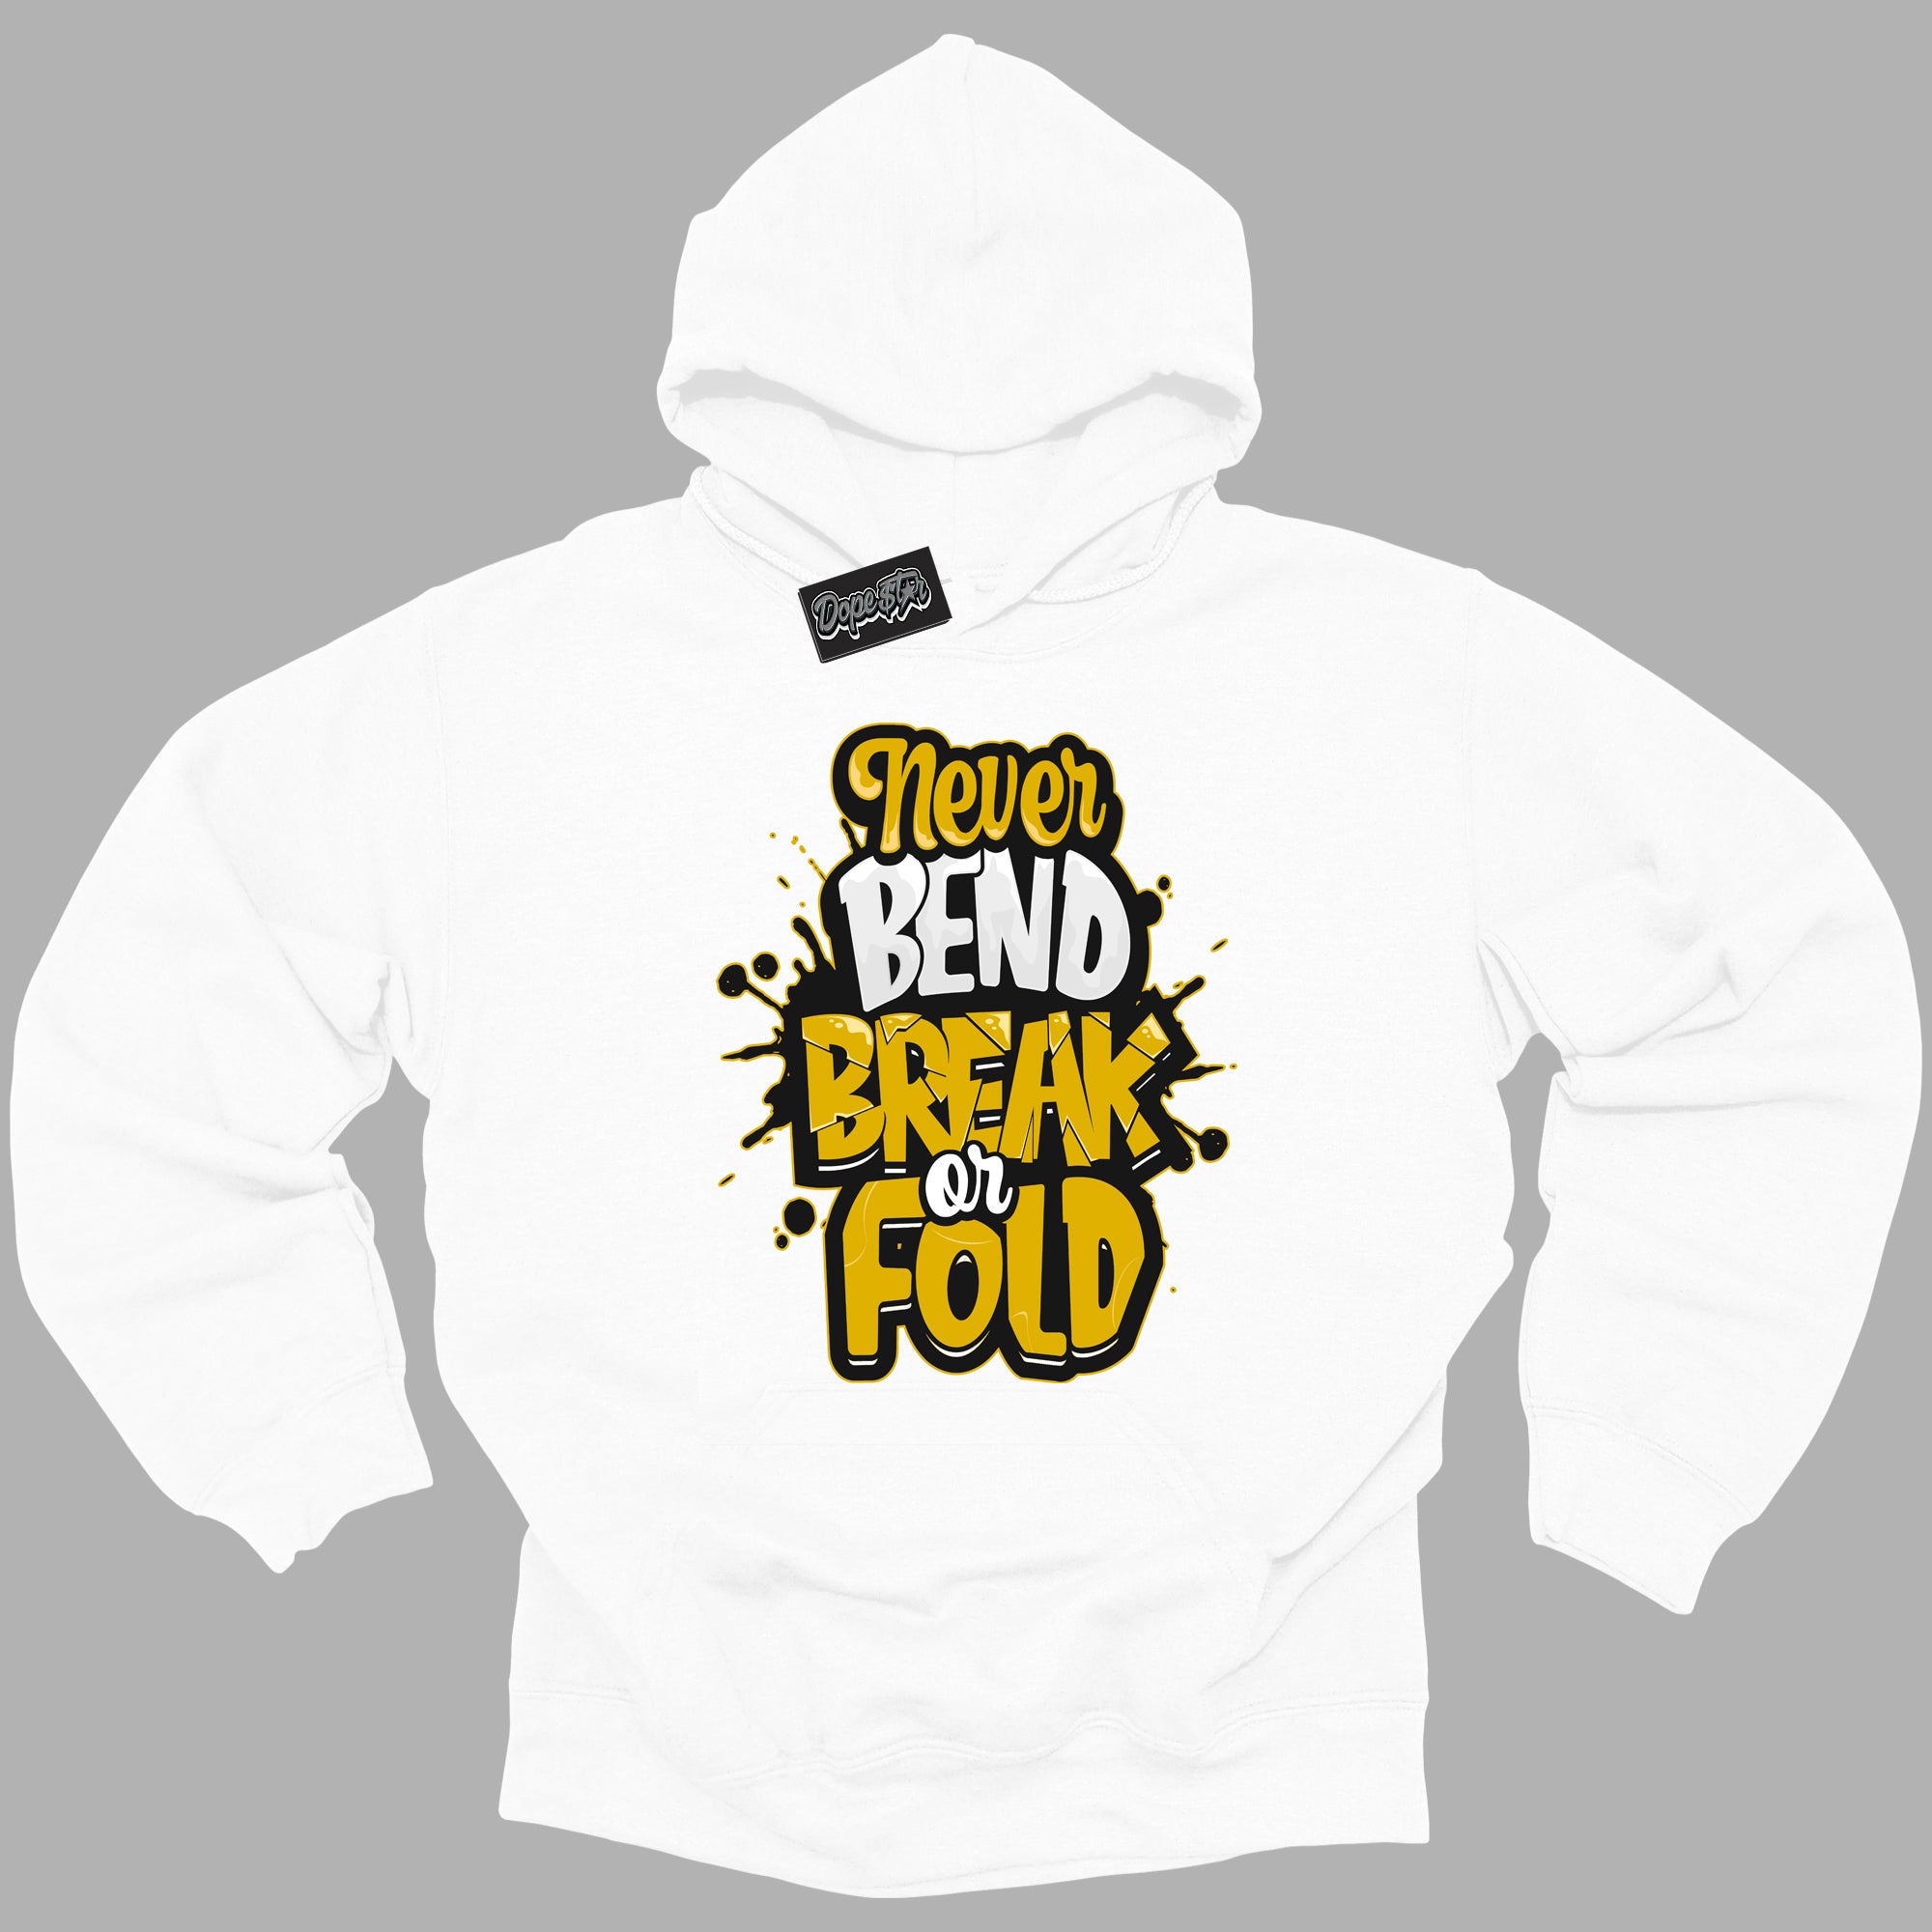 Cool White Hoodie with “ Never Bend Break Or Fold ”  design that Perfectly Matches Yellow Ochre 6s Sneakers.